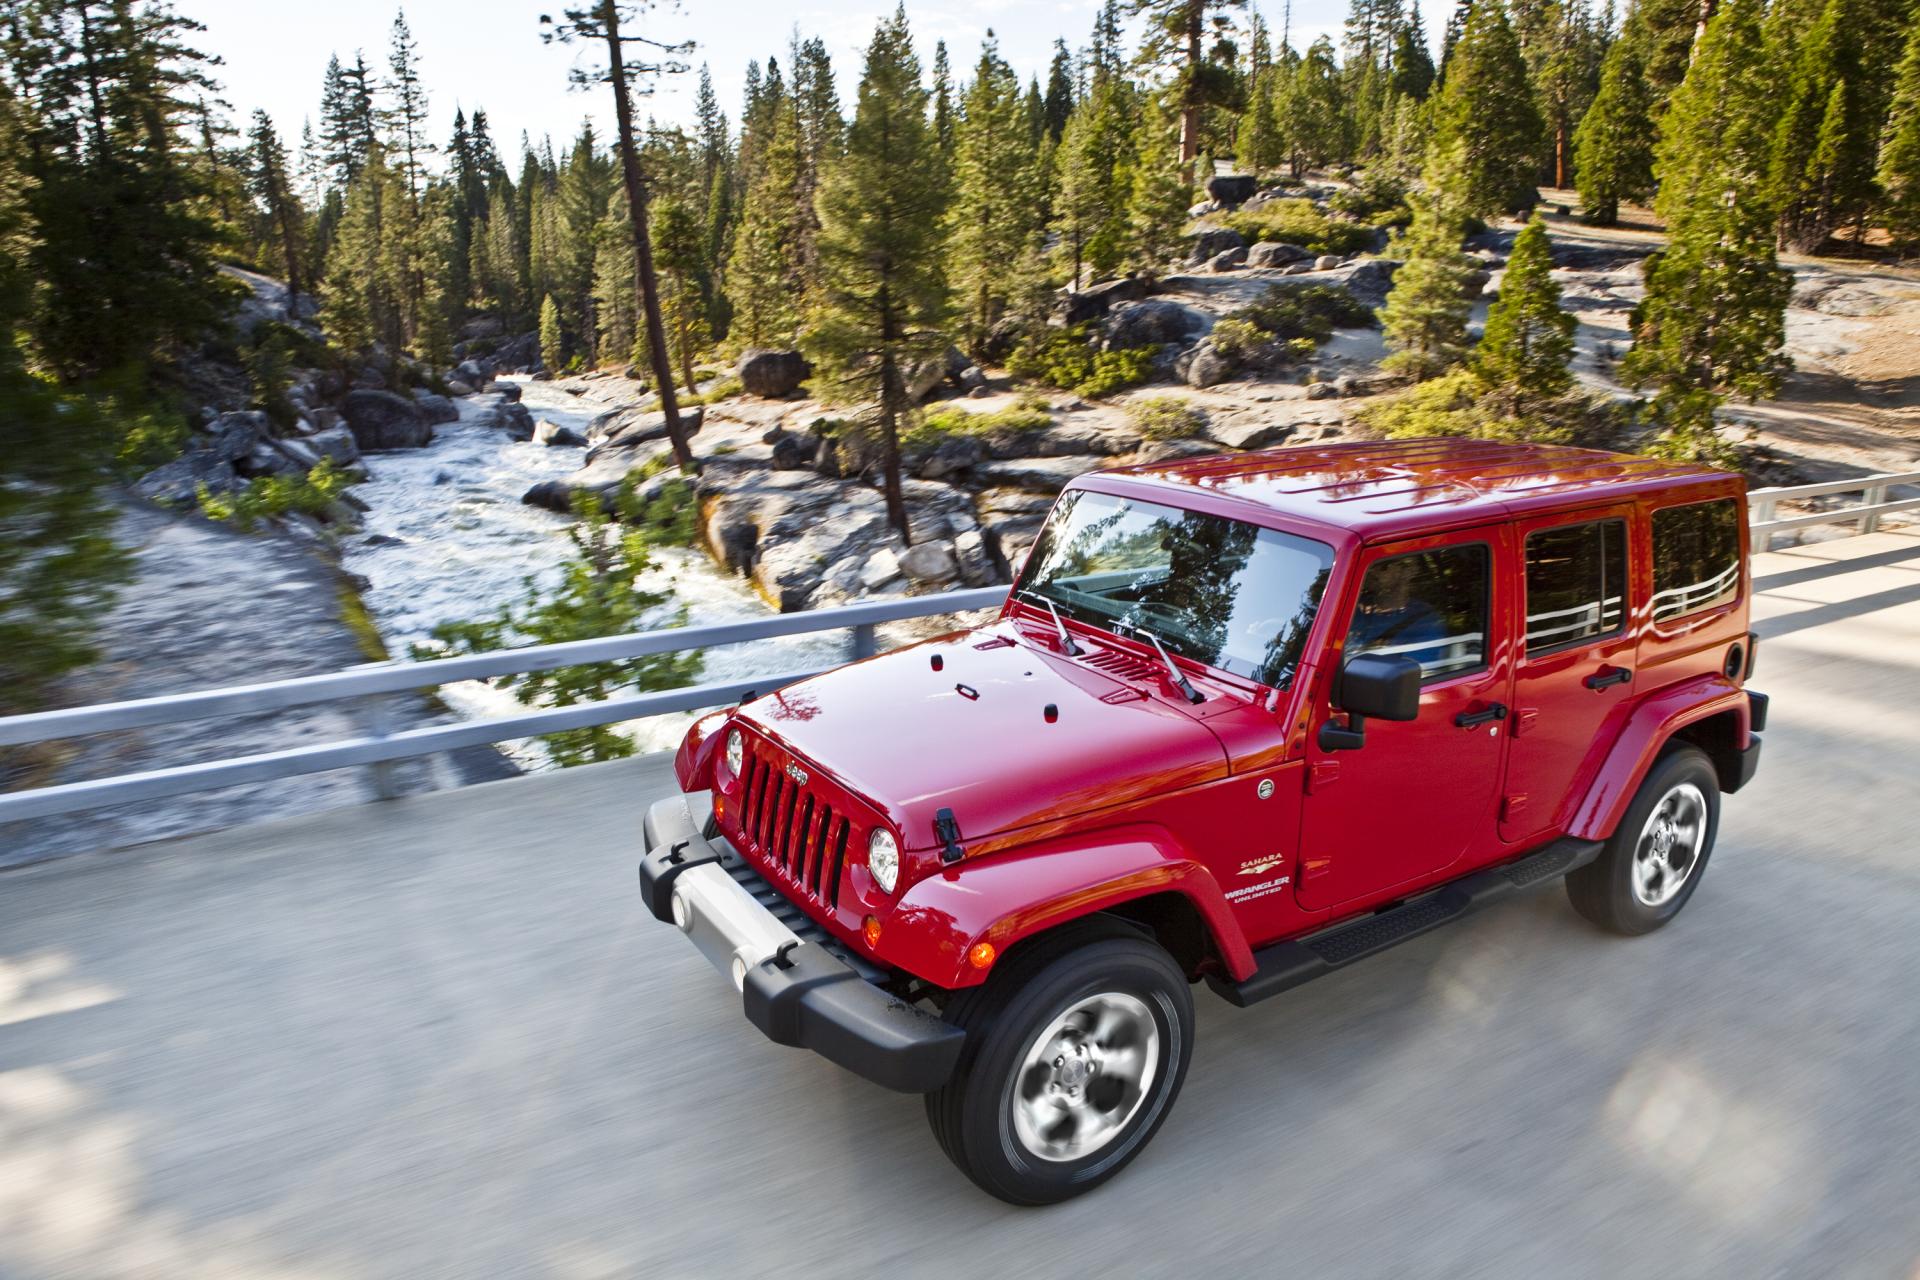 Jeep Wrangler Unlimited Wallpaper And Image Gallery